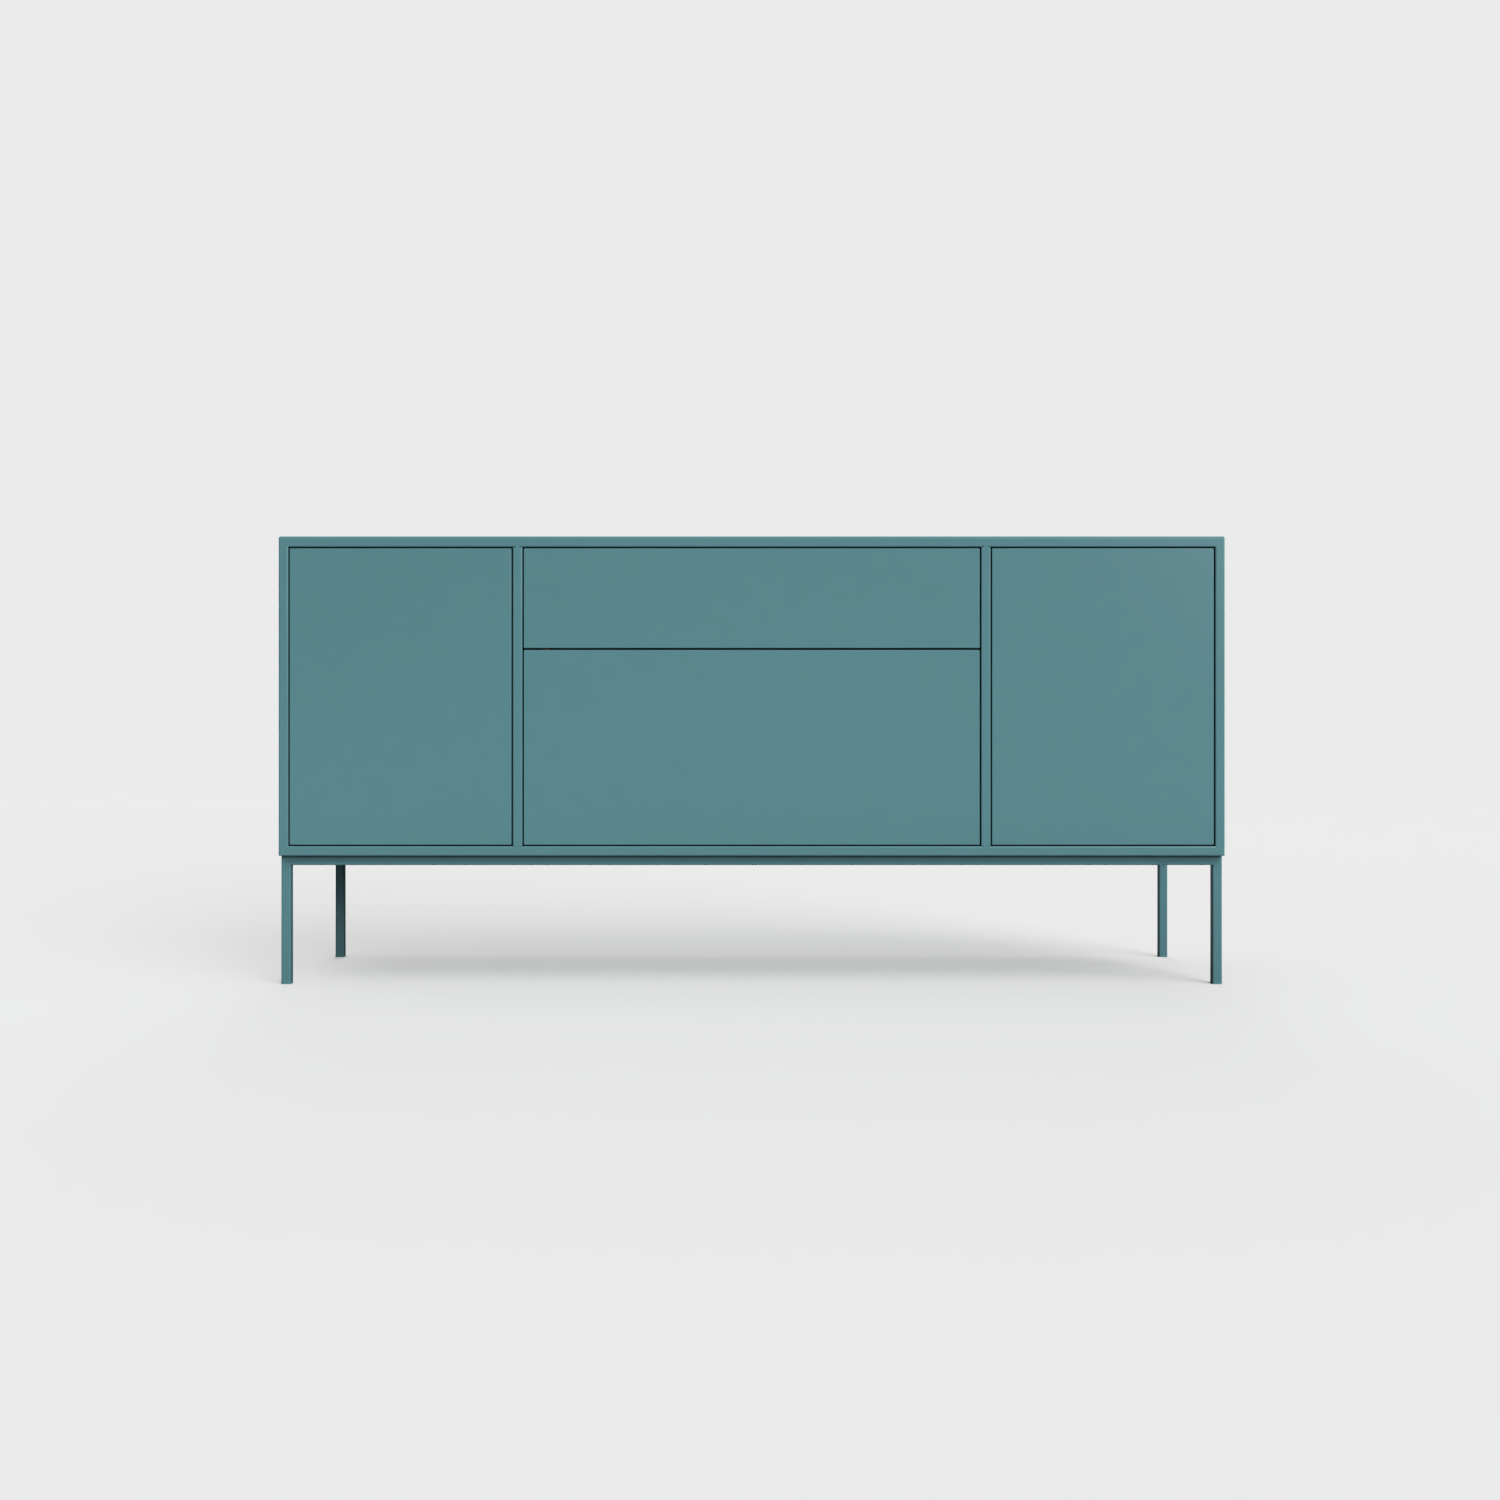 Arnika 02 Sideboard in Turquoise color, powder-coated steel, elegant and modern piece of furniture for your living room